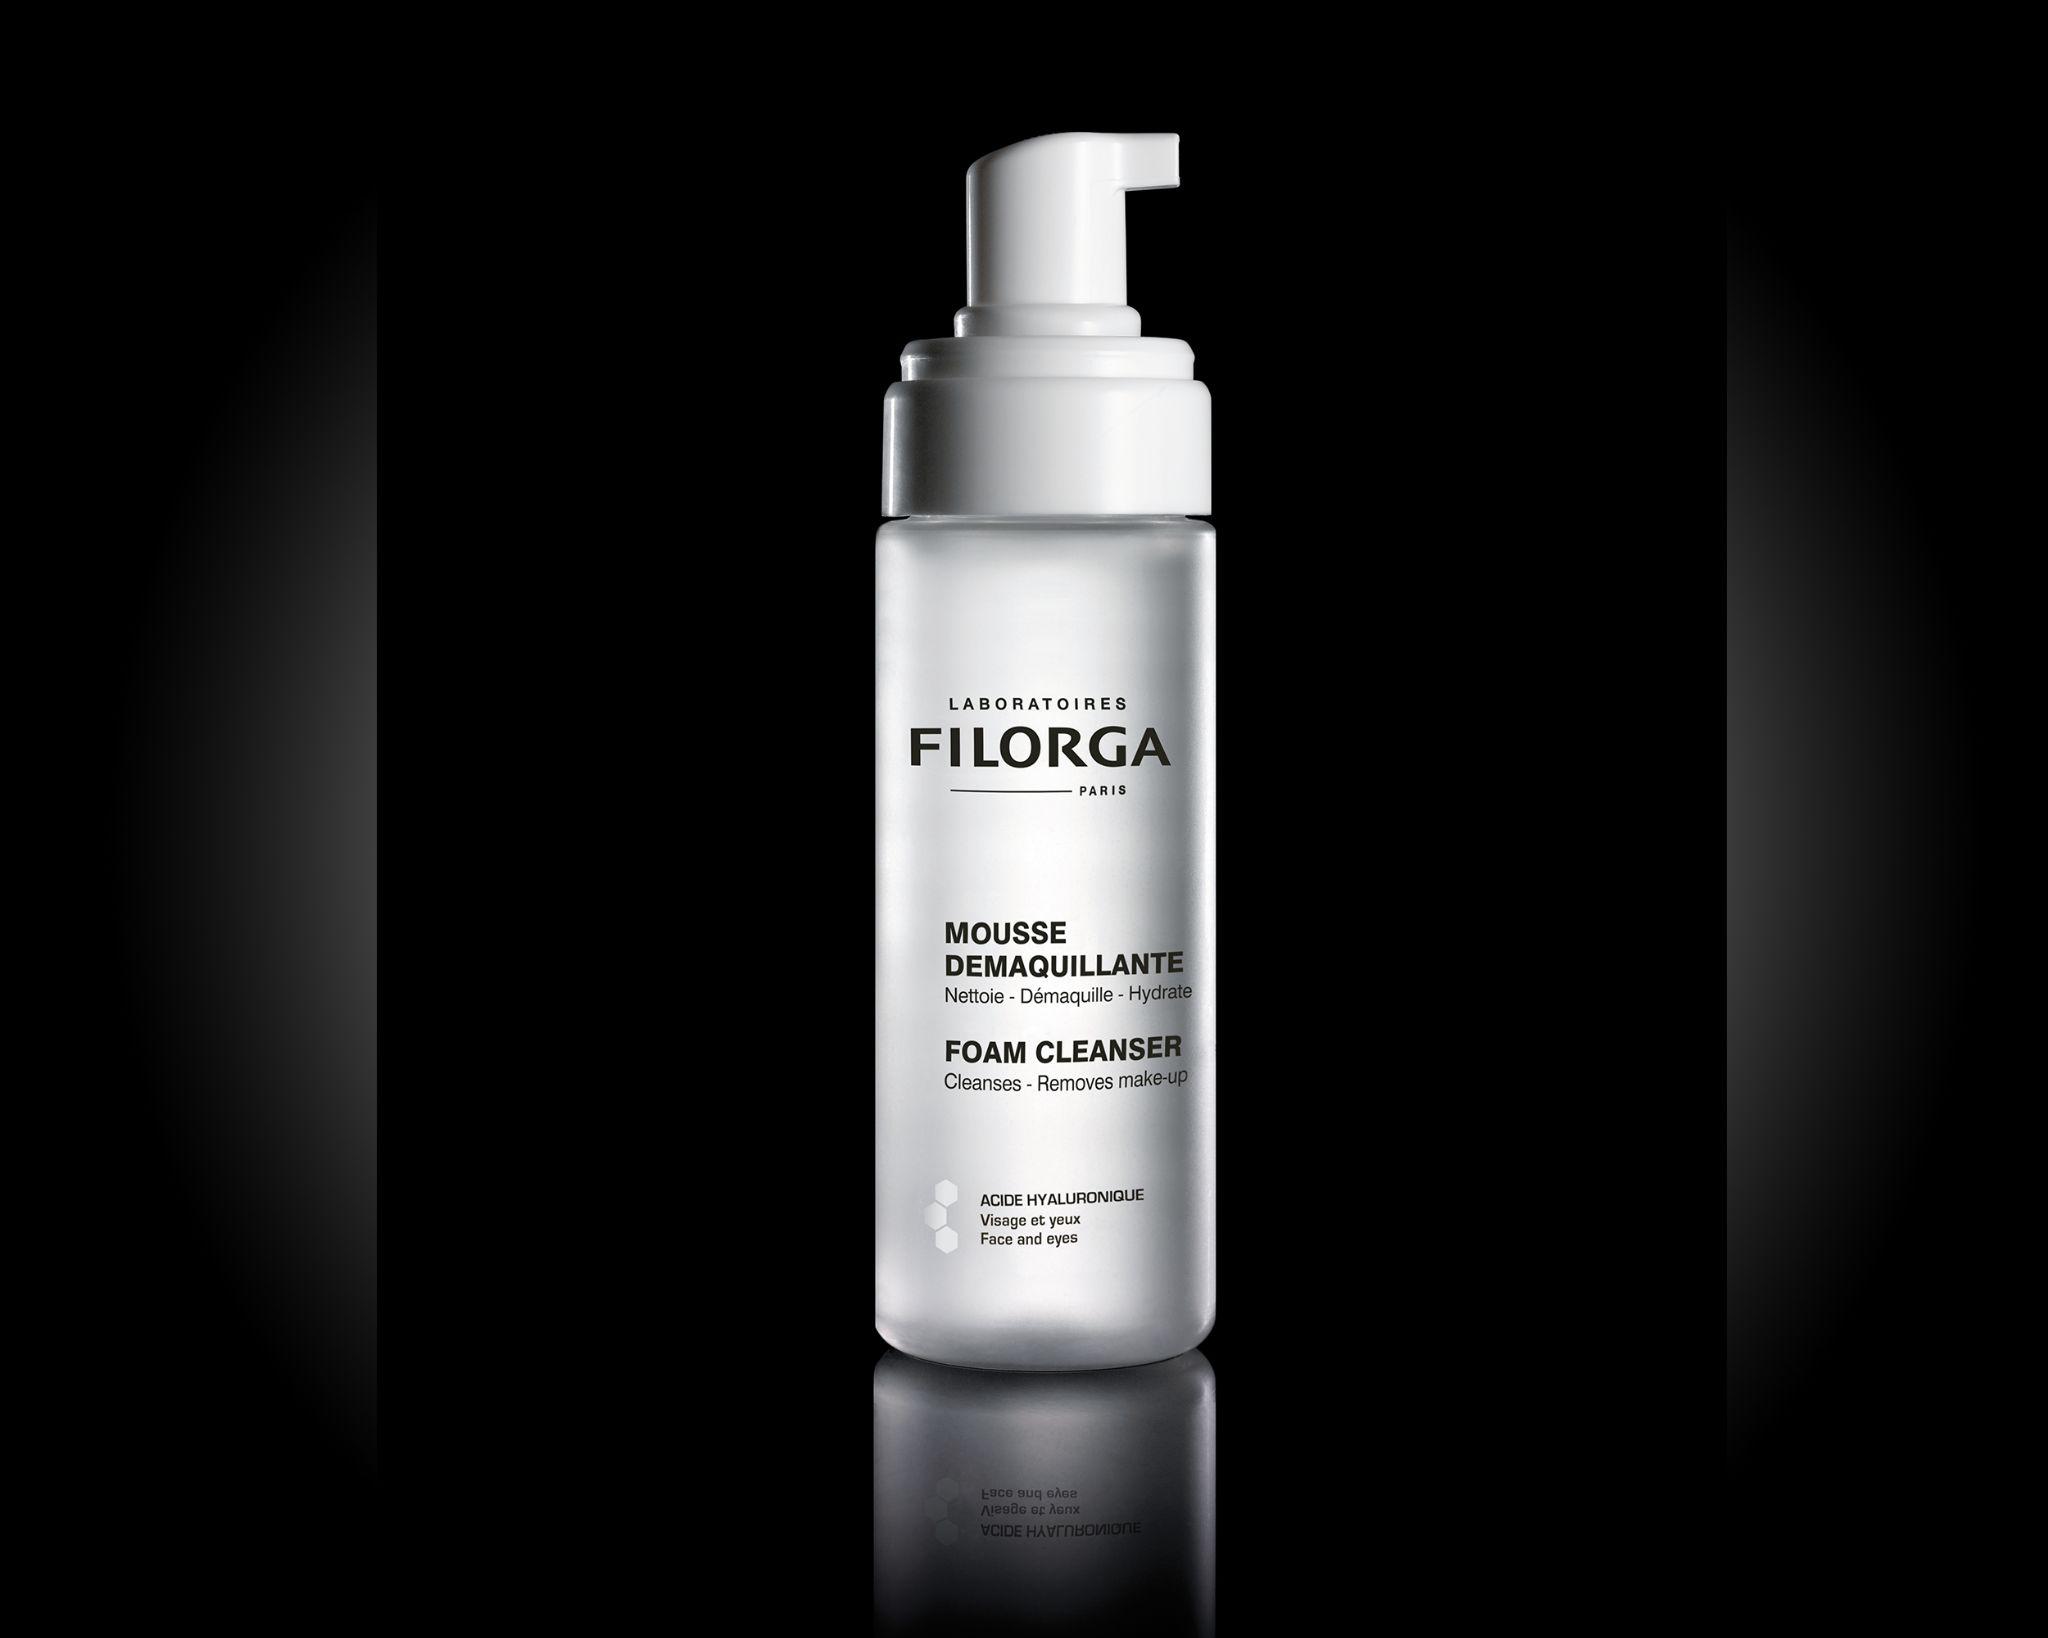 Filorga Foam Cleanser Face Wash and Makeup Remover